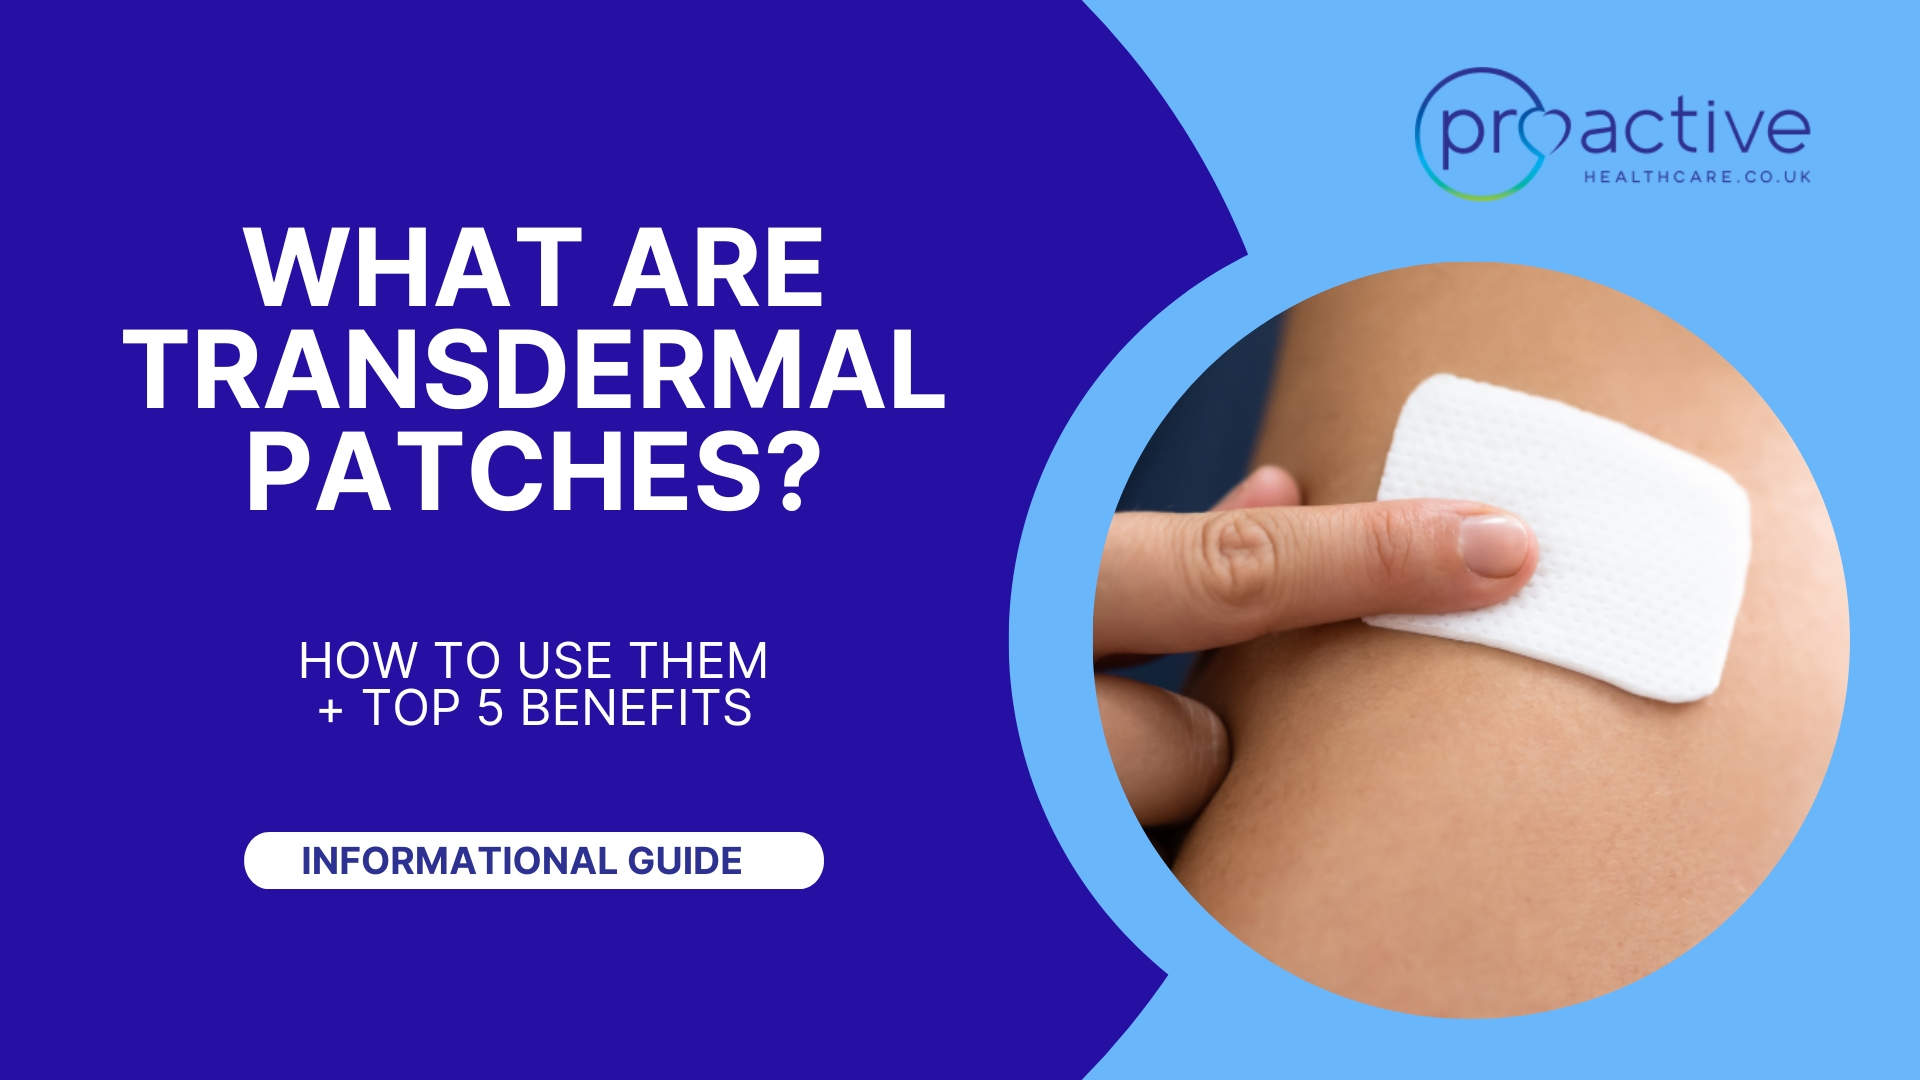 What Are Transdermal Patches